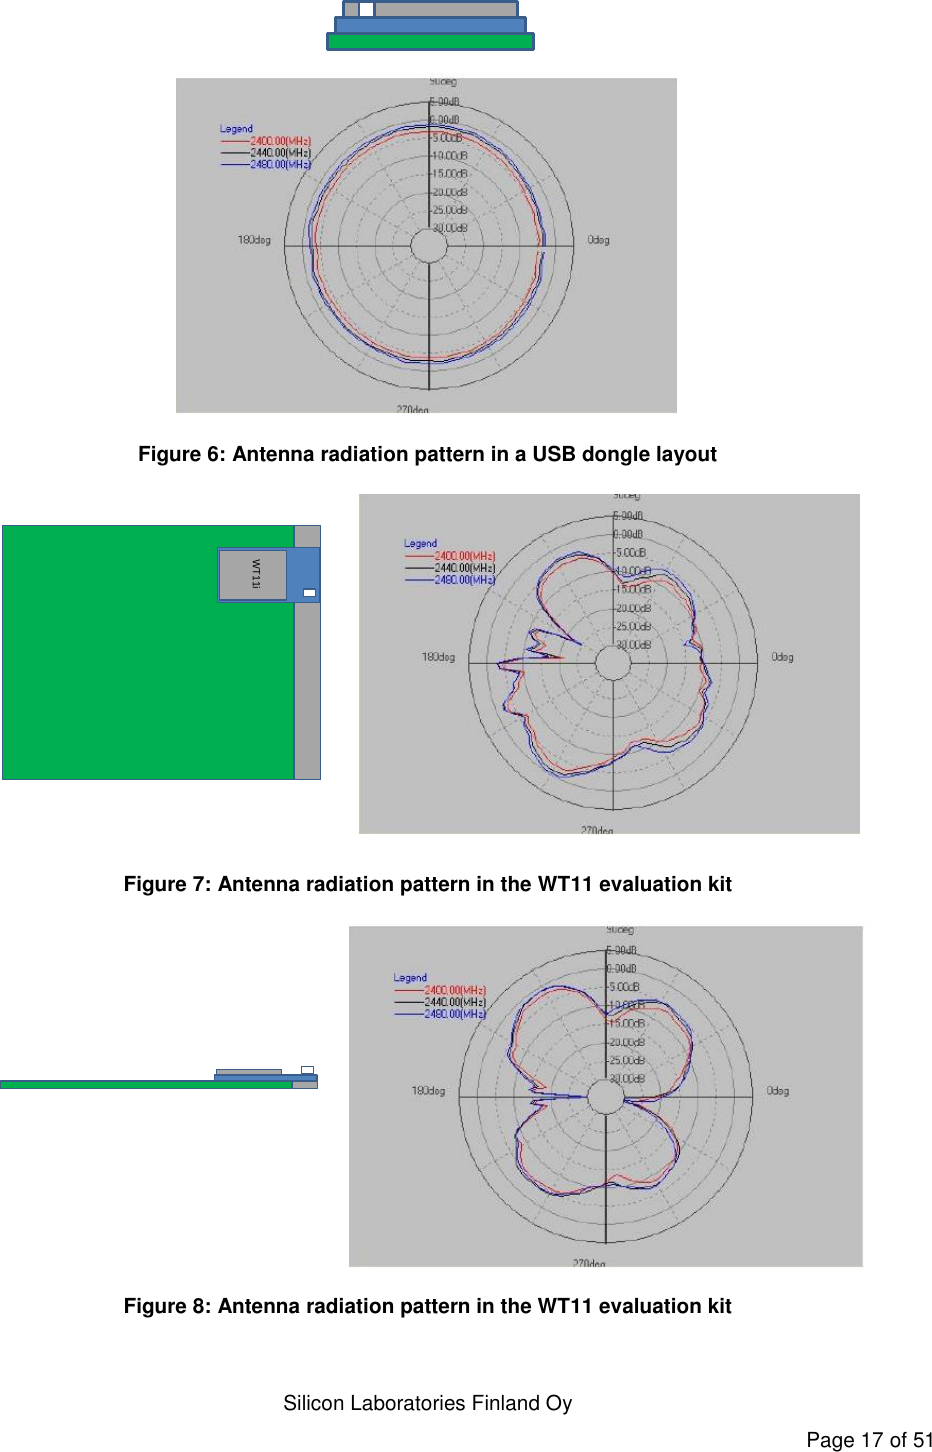   Silicon Laboratories Finland Oy Page 17 of 51  Figure 6: Antenna radiation pattern in a USB dongle layout  Figure 7: Antenna radiation pattern in the WT11 evaluation kit  Figure 8: Antenna radiation pattern in the WT11 evaluation kit WT11i